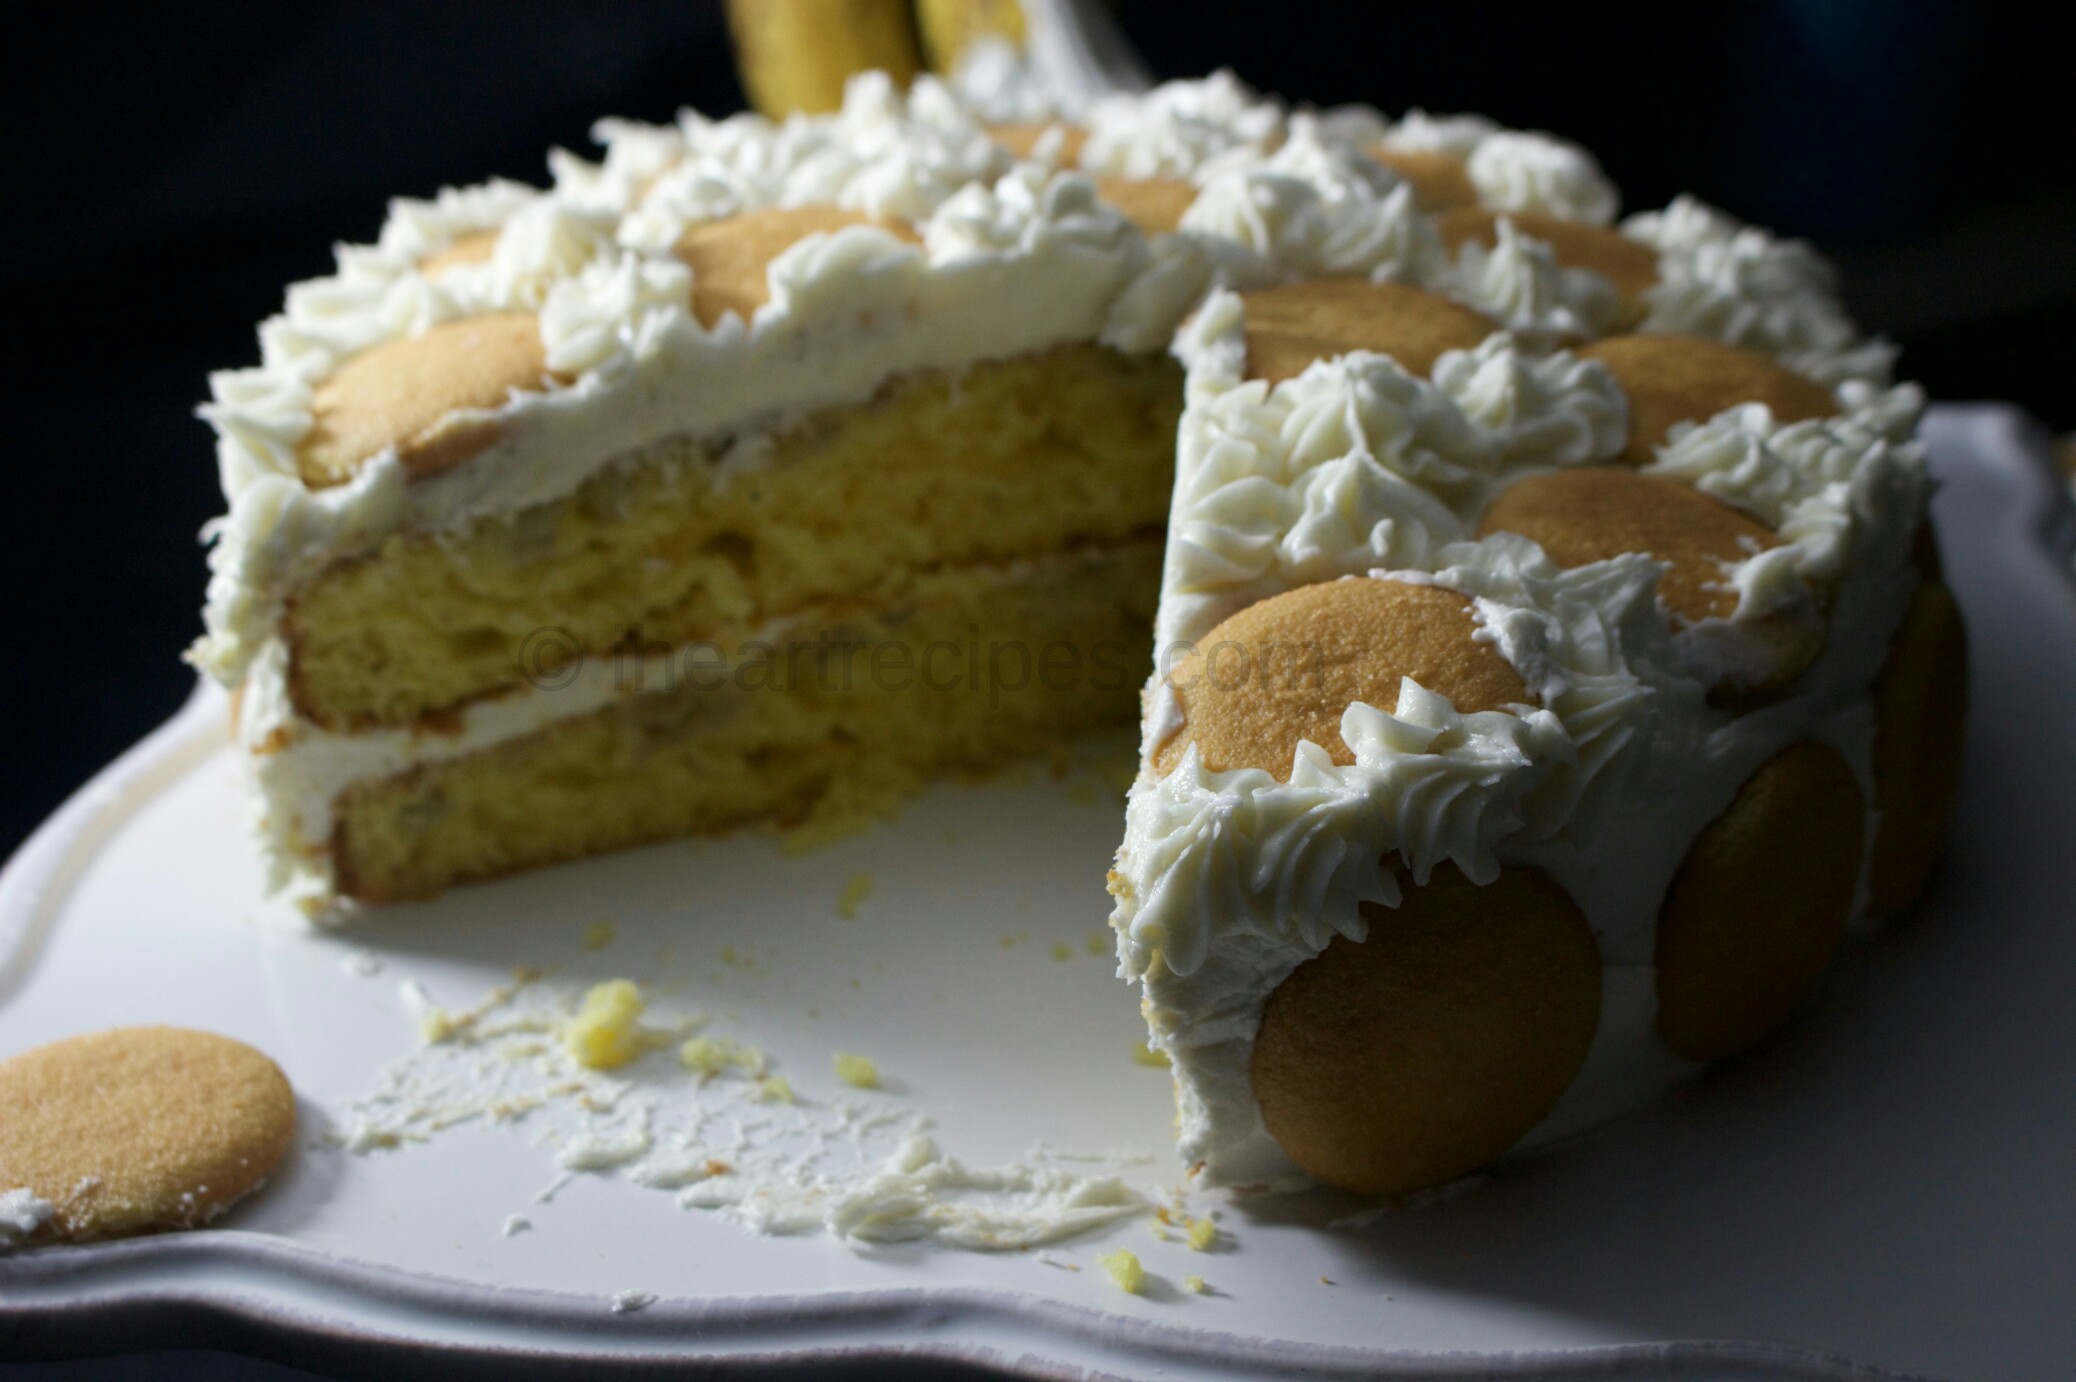 A side angle view of a two-layer banana pudding cake. The moist yellow banana cake is frosted with a homemade vanilla icing and topped with Nilla wafers. A large slice has been cut from the cake, showing the moist yellow cake layers inside.